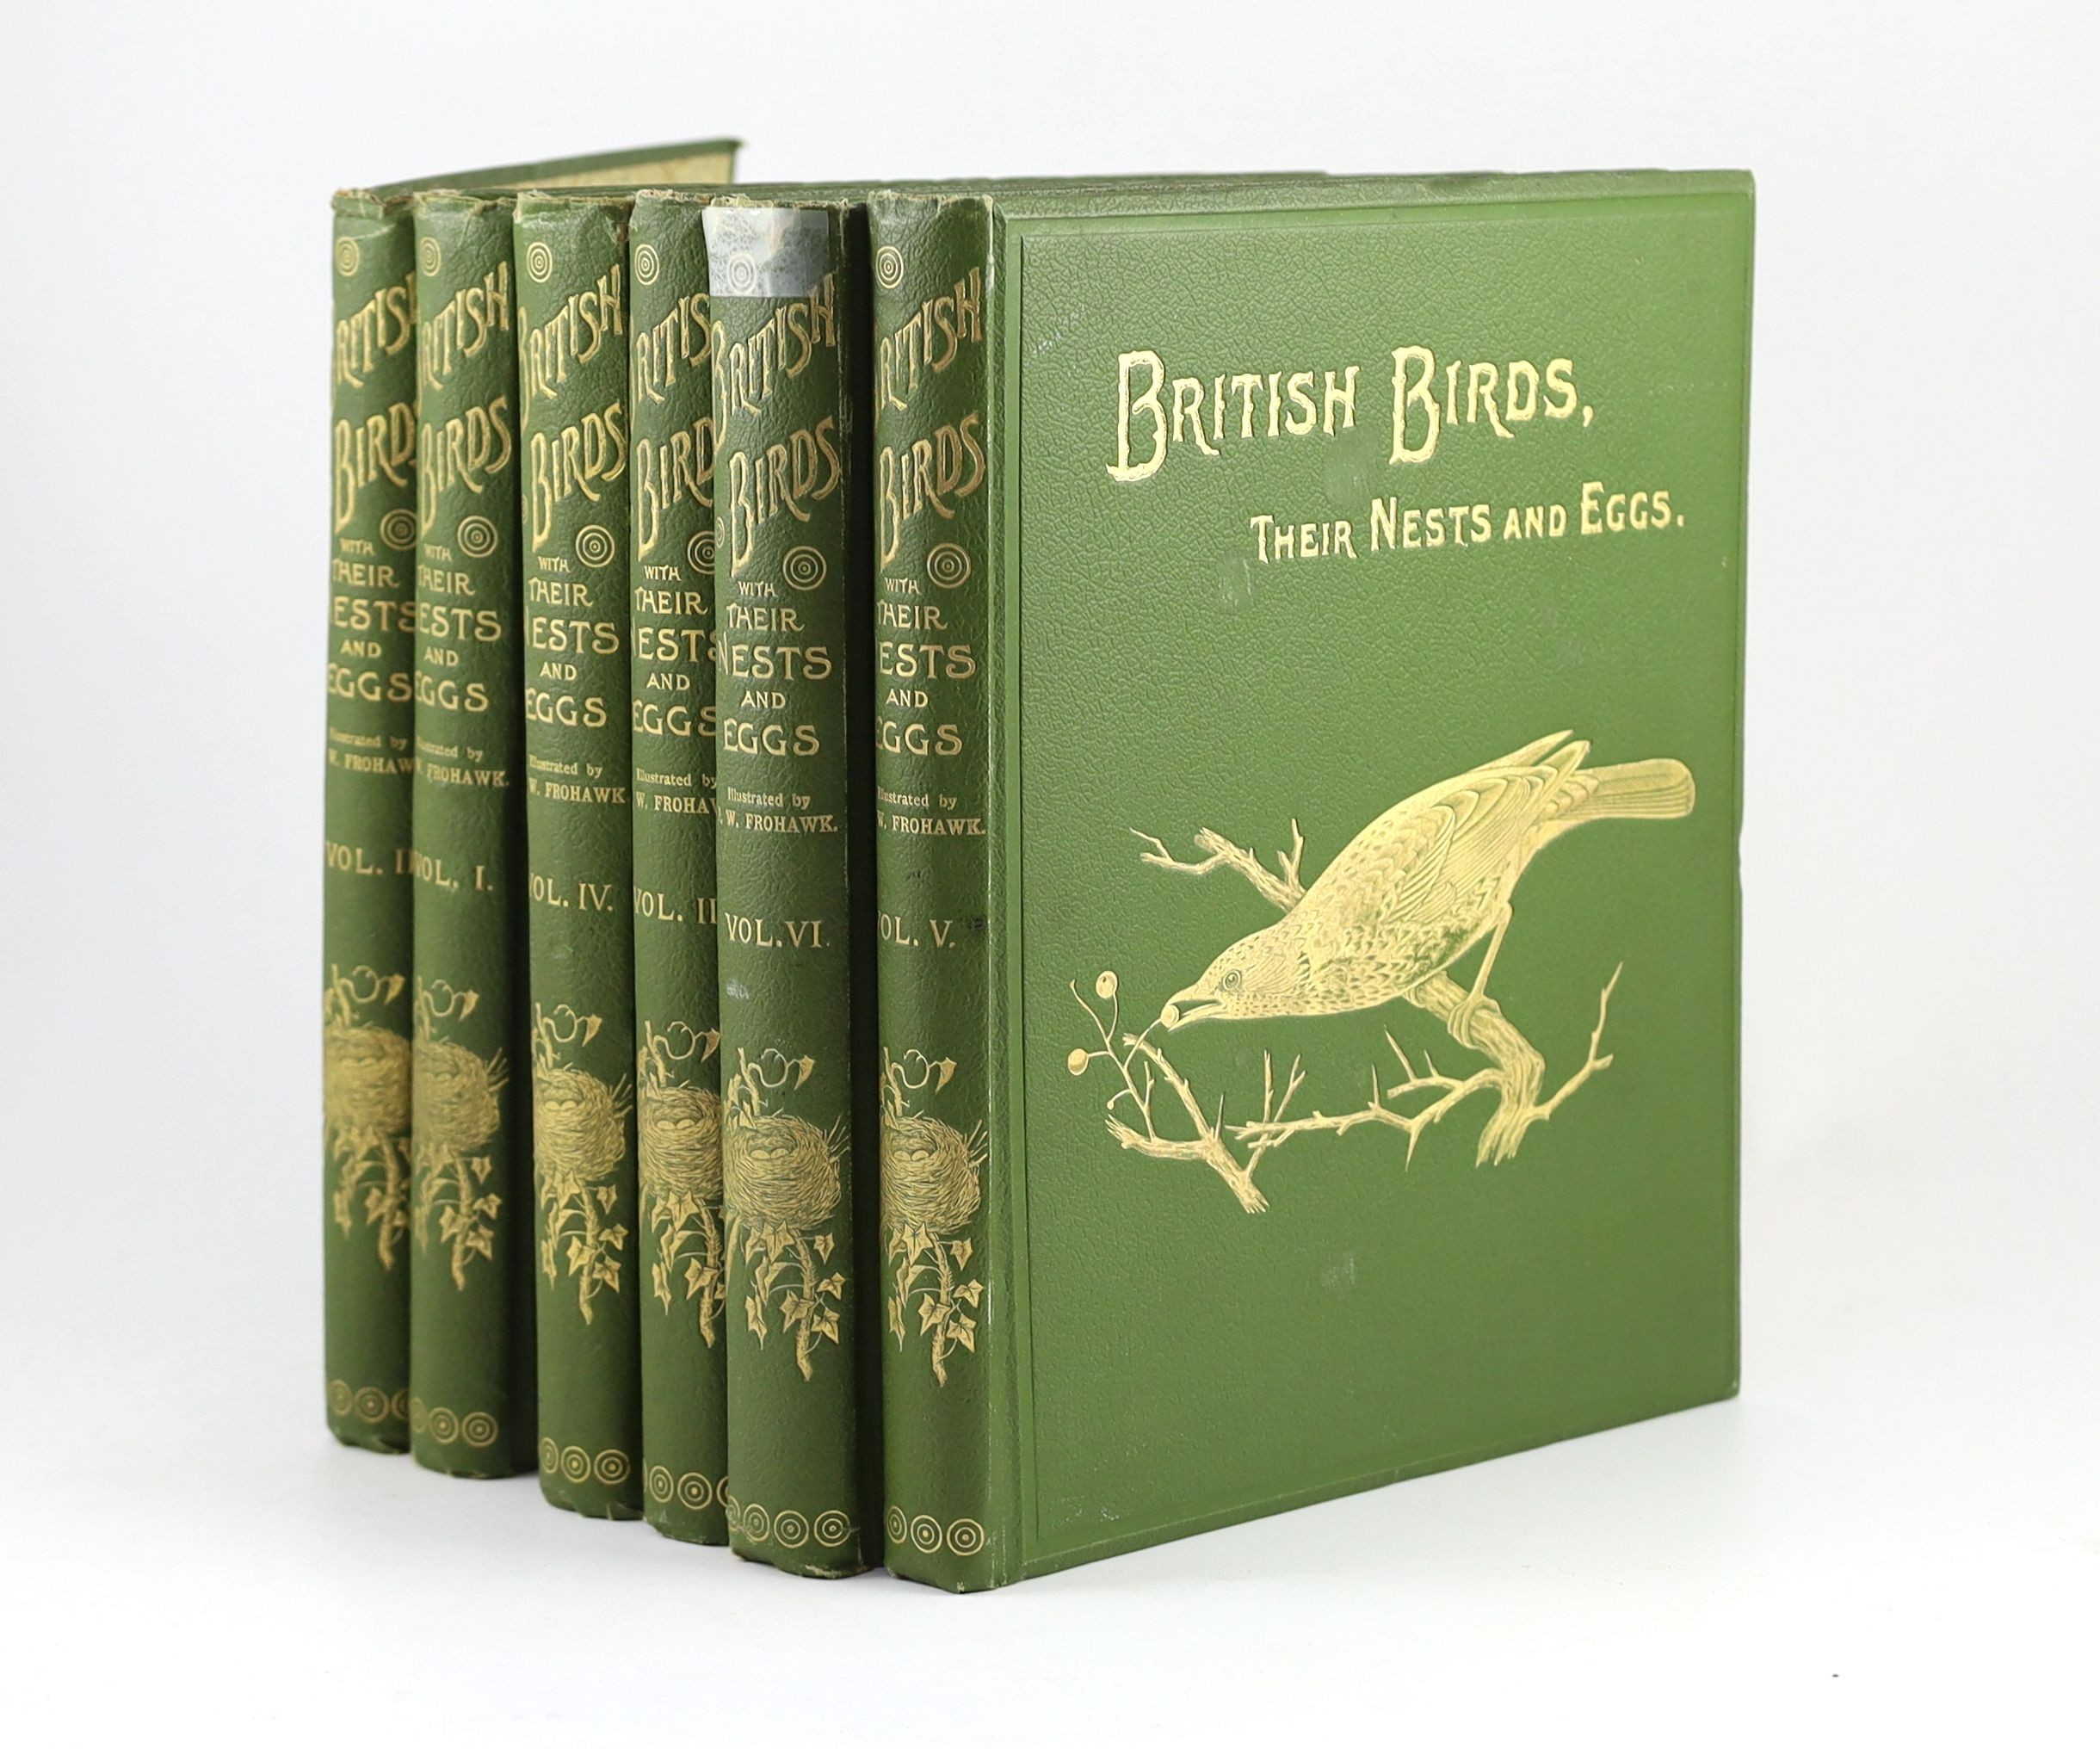 Butler, Arthur Gardiner and others - British Birds, with their Nests and Eggs, 6 vols, 4to, original pictorial cloth gilt, with 24 chromolithograpghs, Brumby and Clarke, Hull and London, [1896-98]